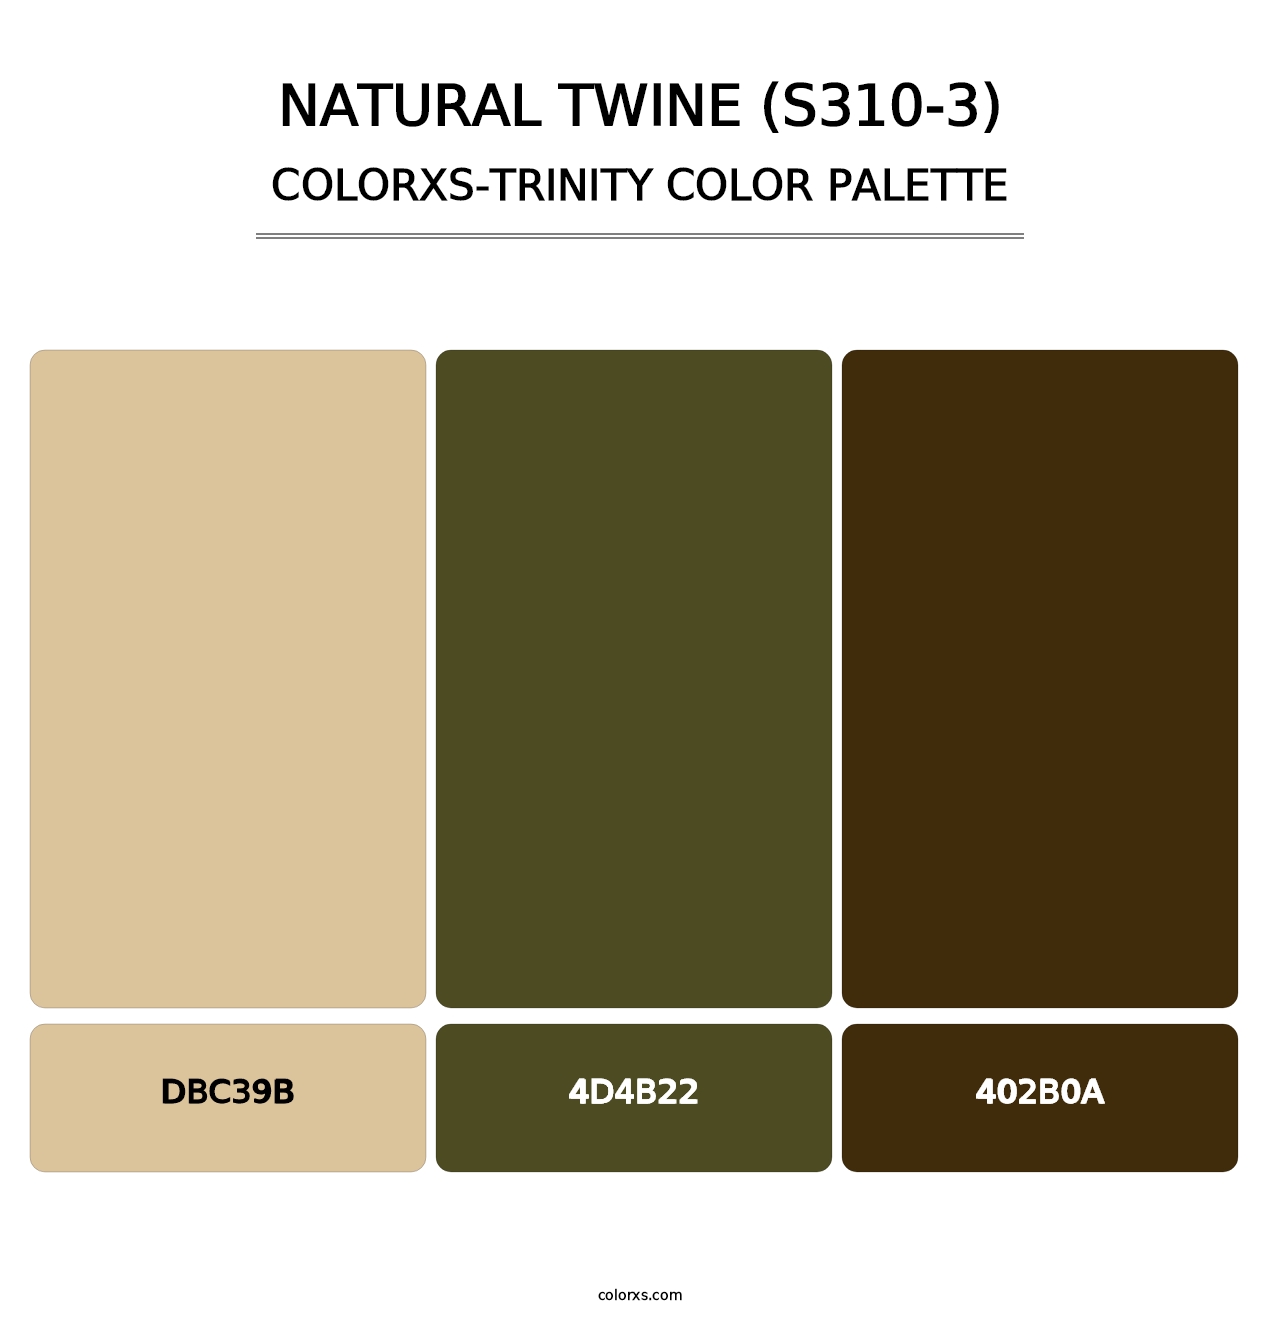 Natural Twine (S310-3) - Colorxs Trinity Palette